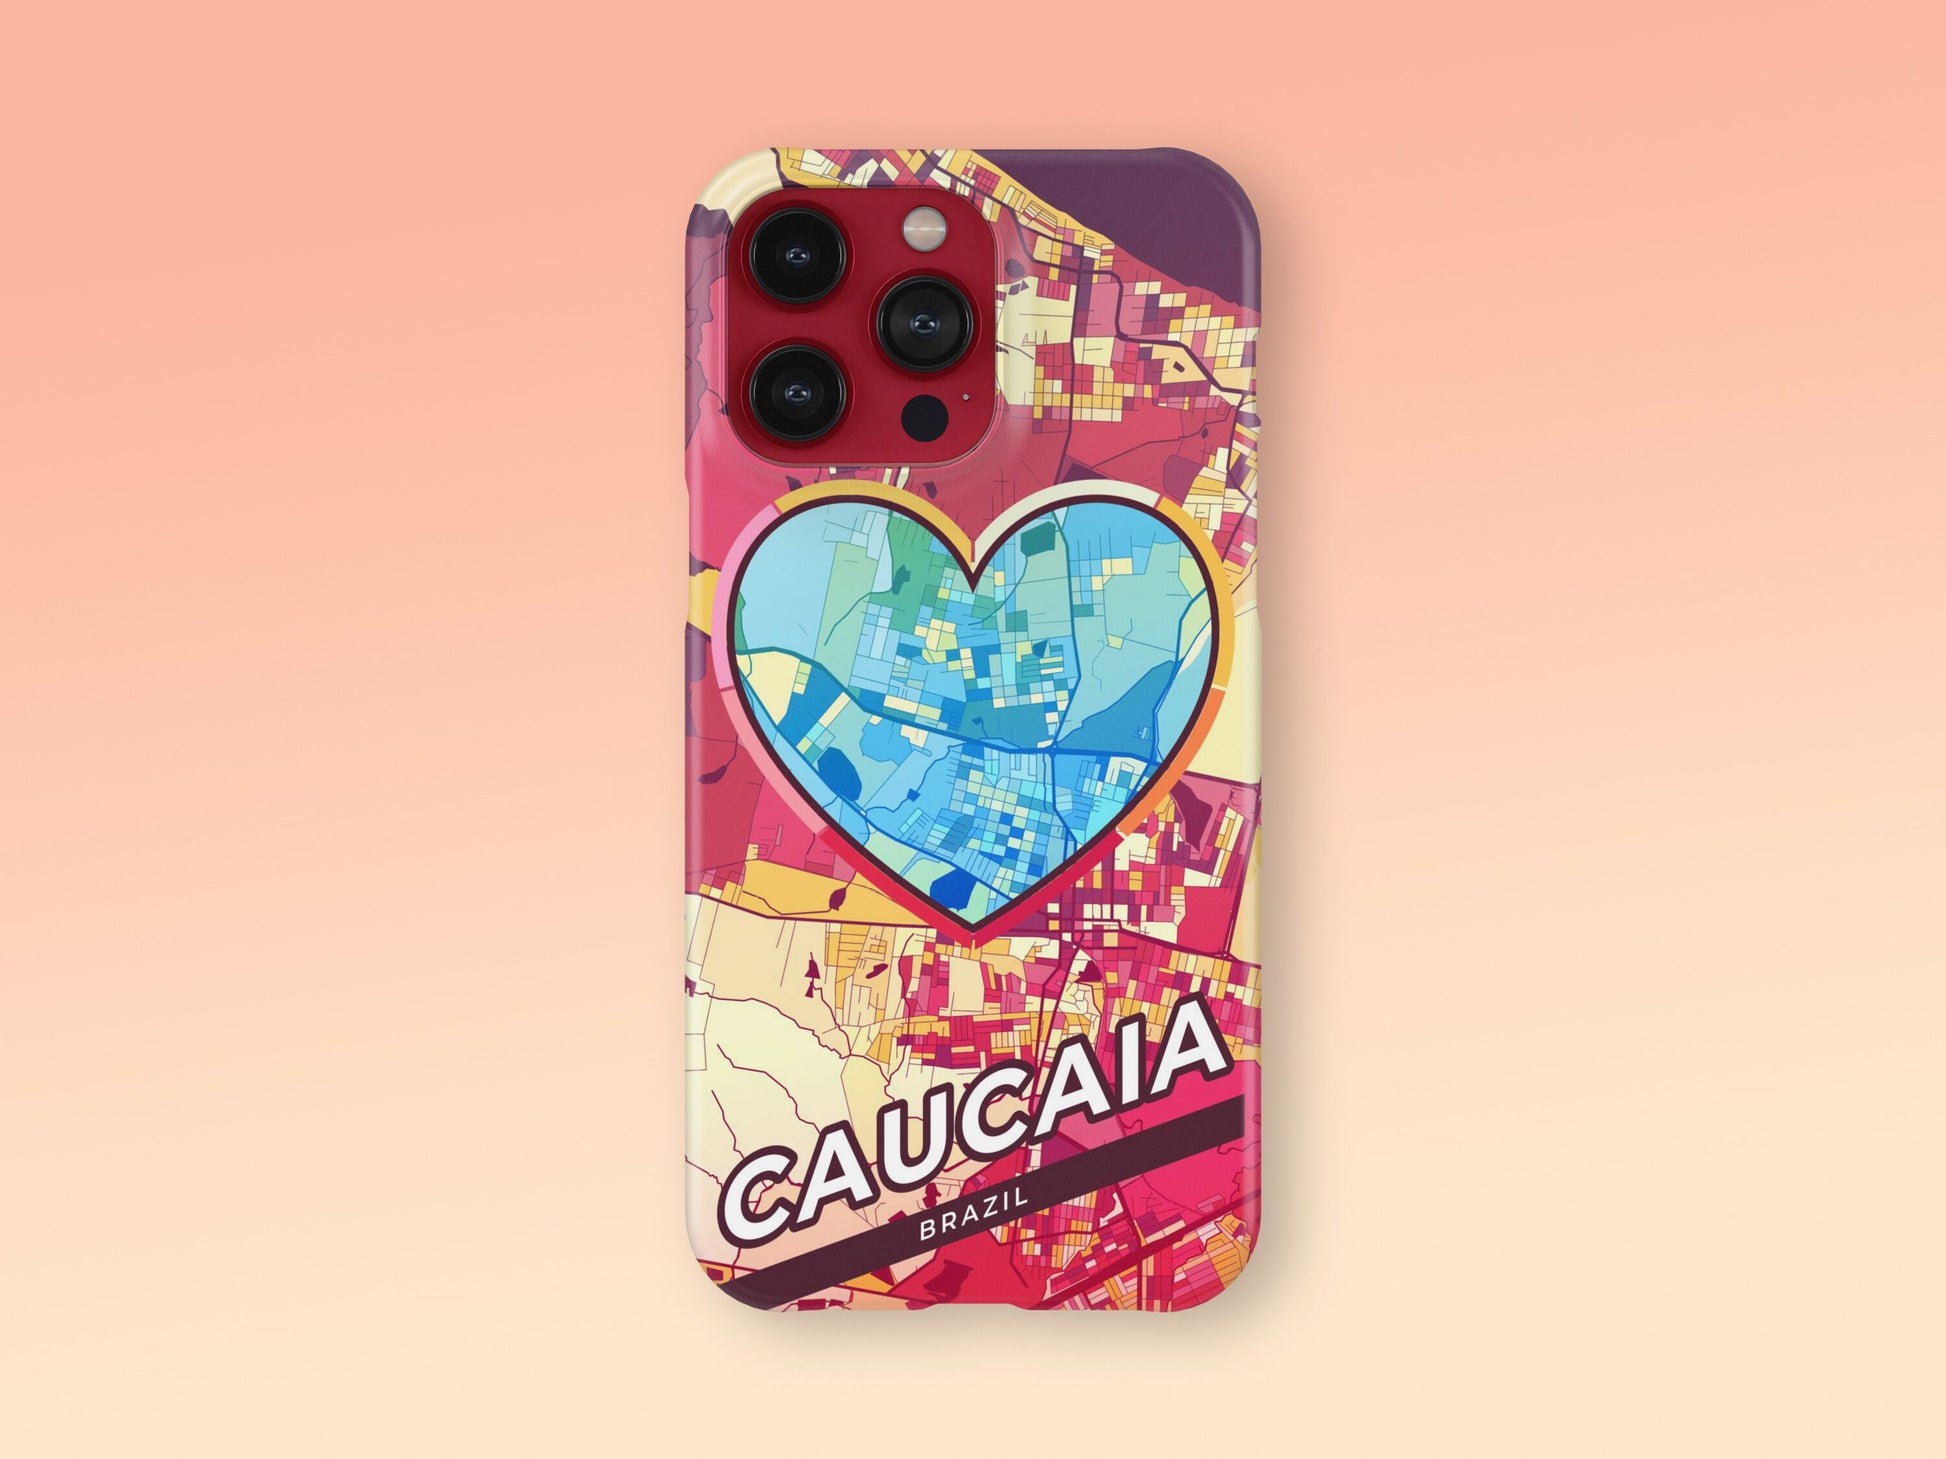 Caucaia Brazil slim phone case with colorful icon. Birthday, wedding or housewarming gift. Couple match cases. 2